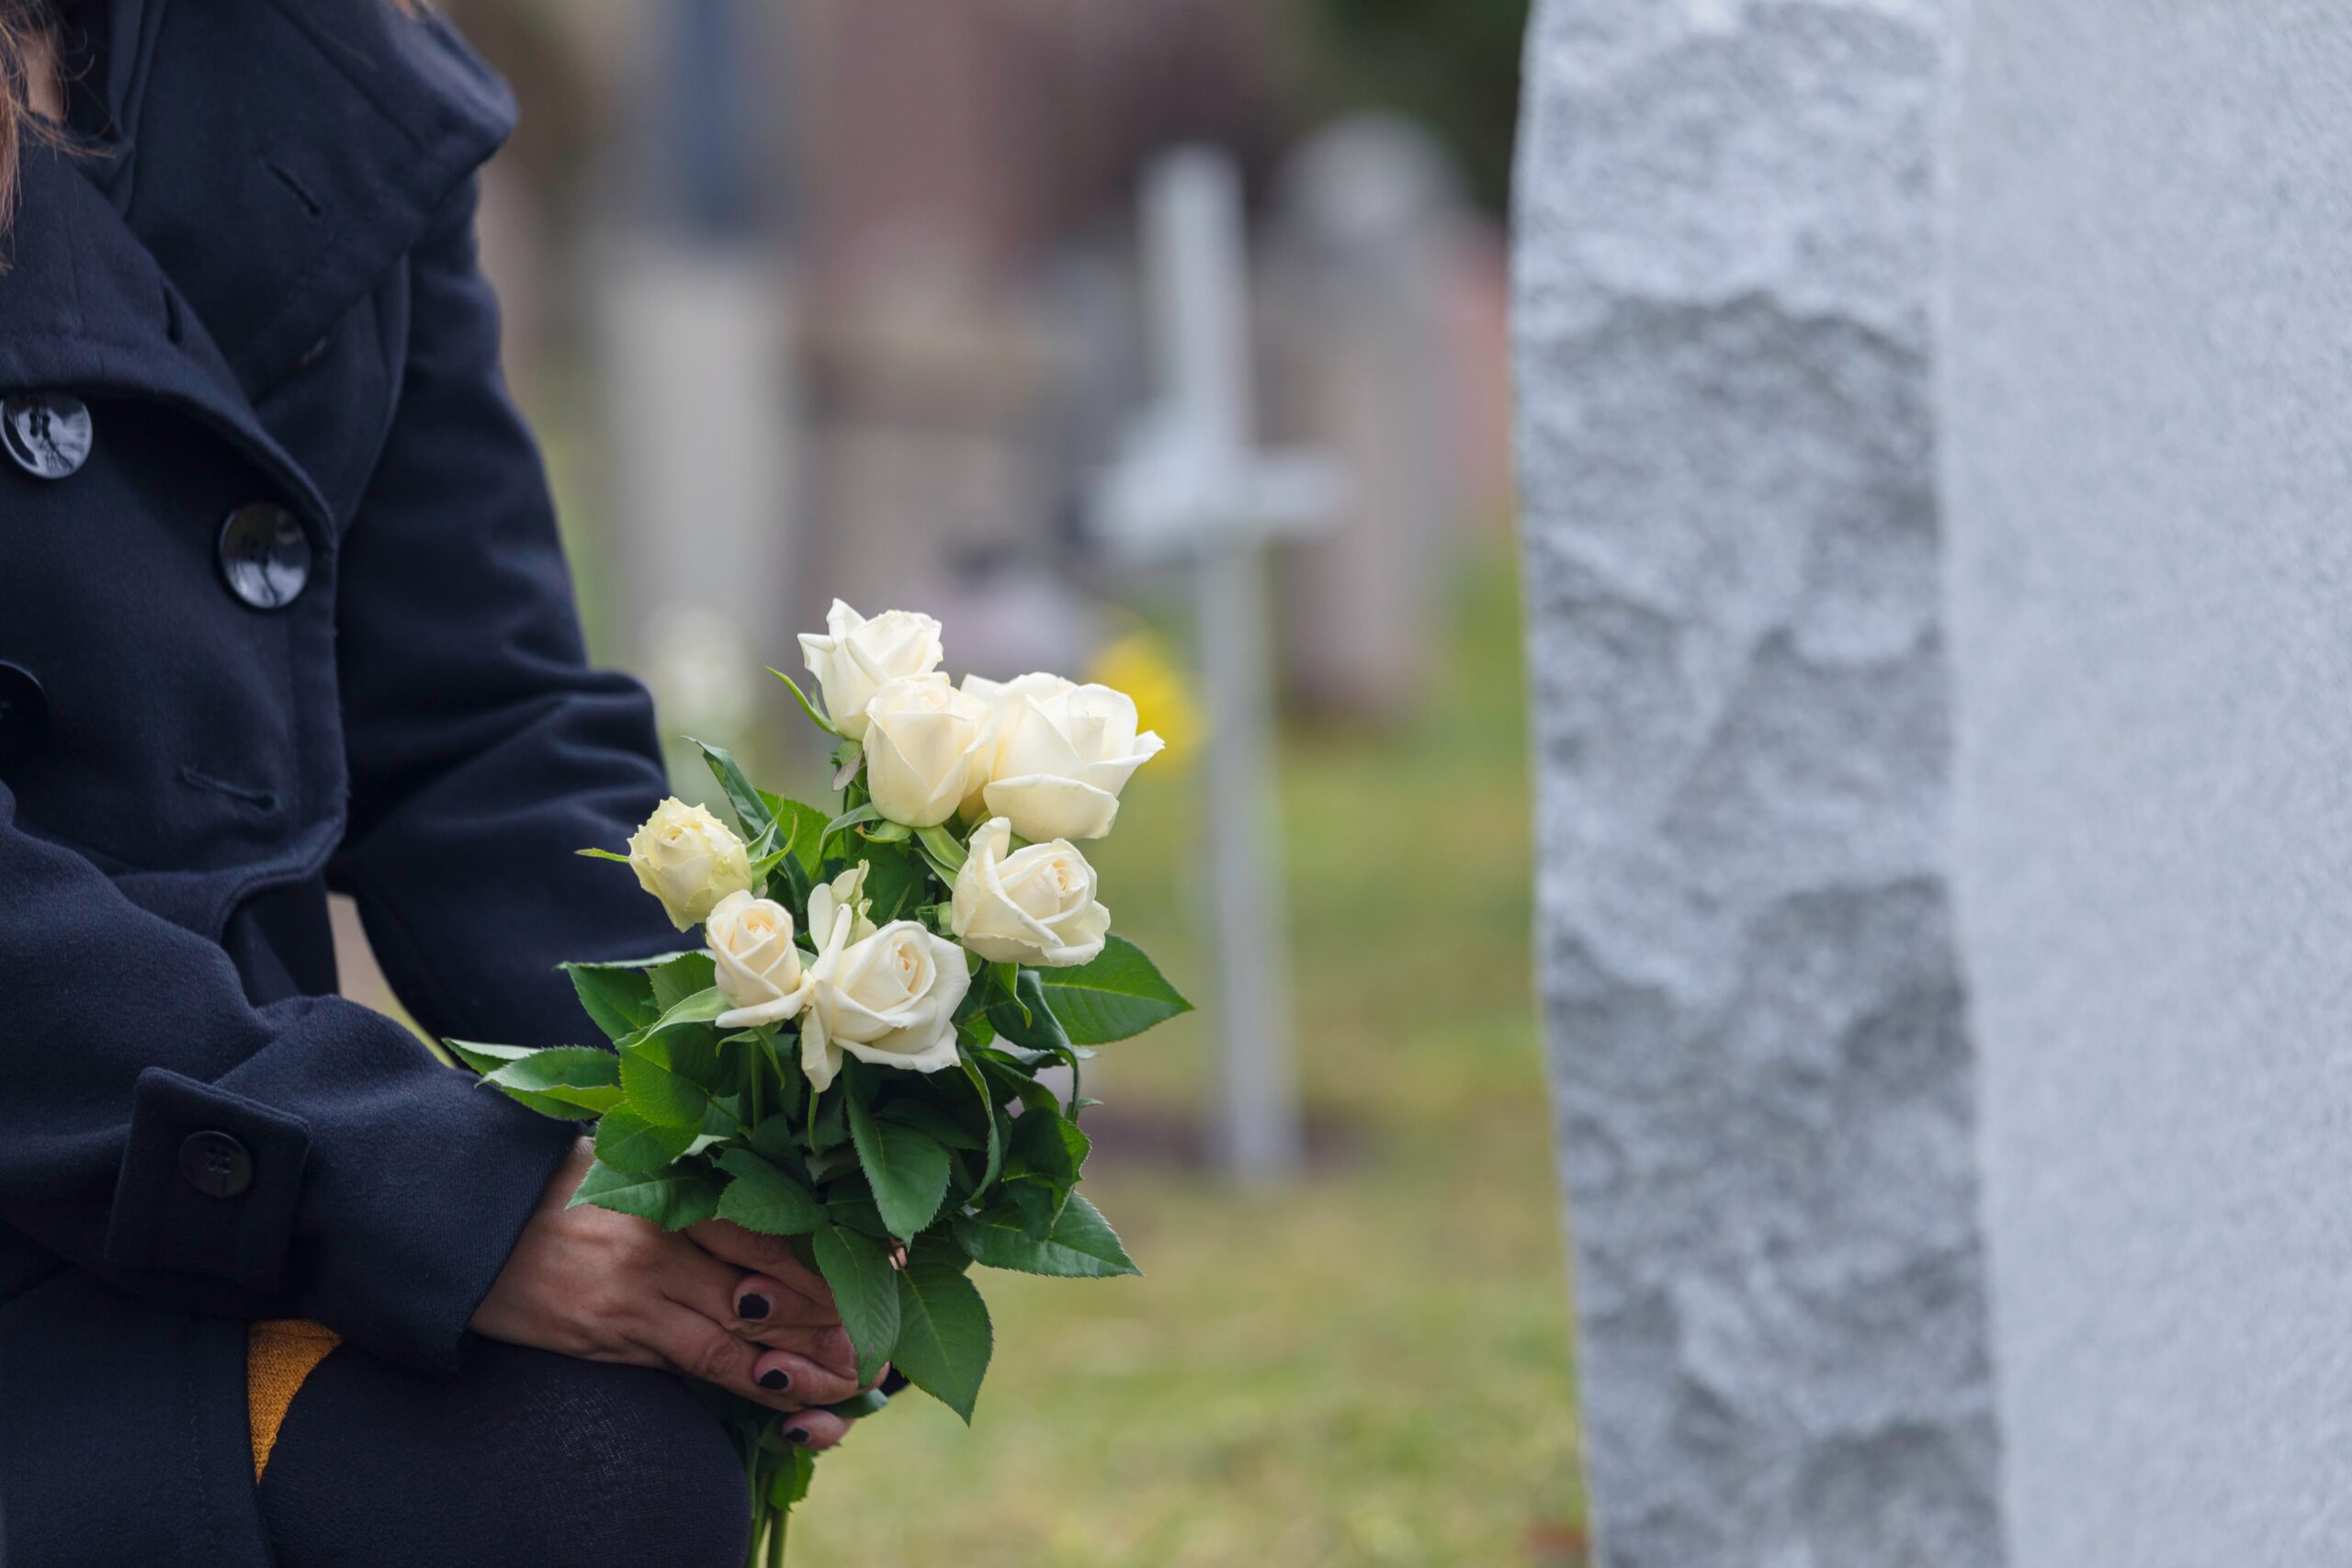 How Will I Pay For a Funeral After a Wrongful Death?